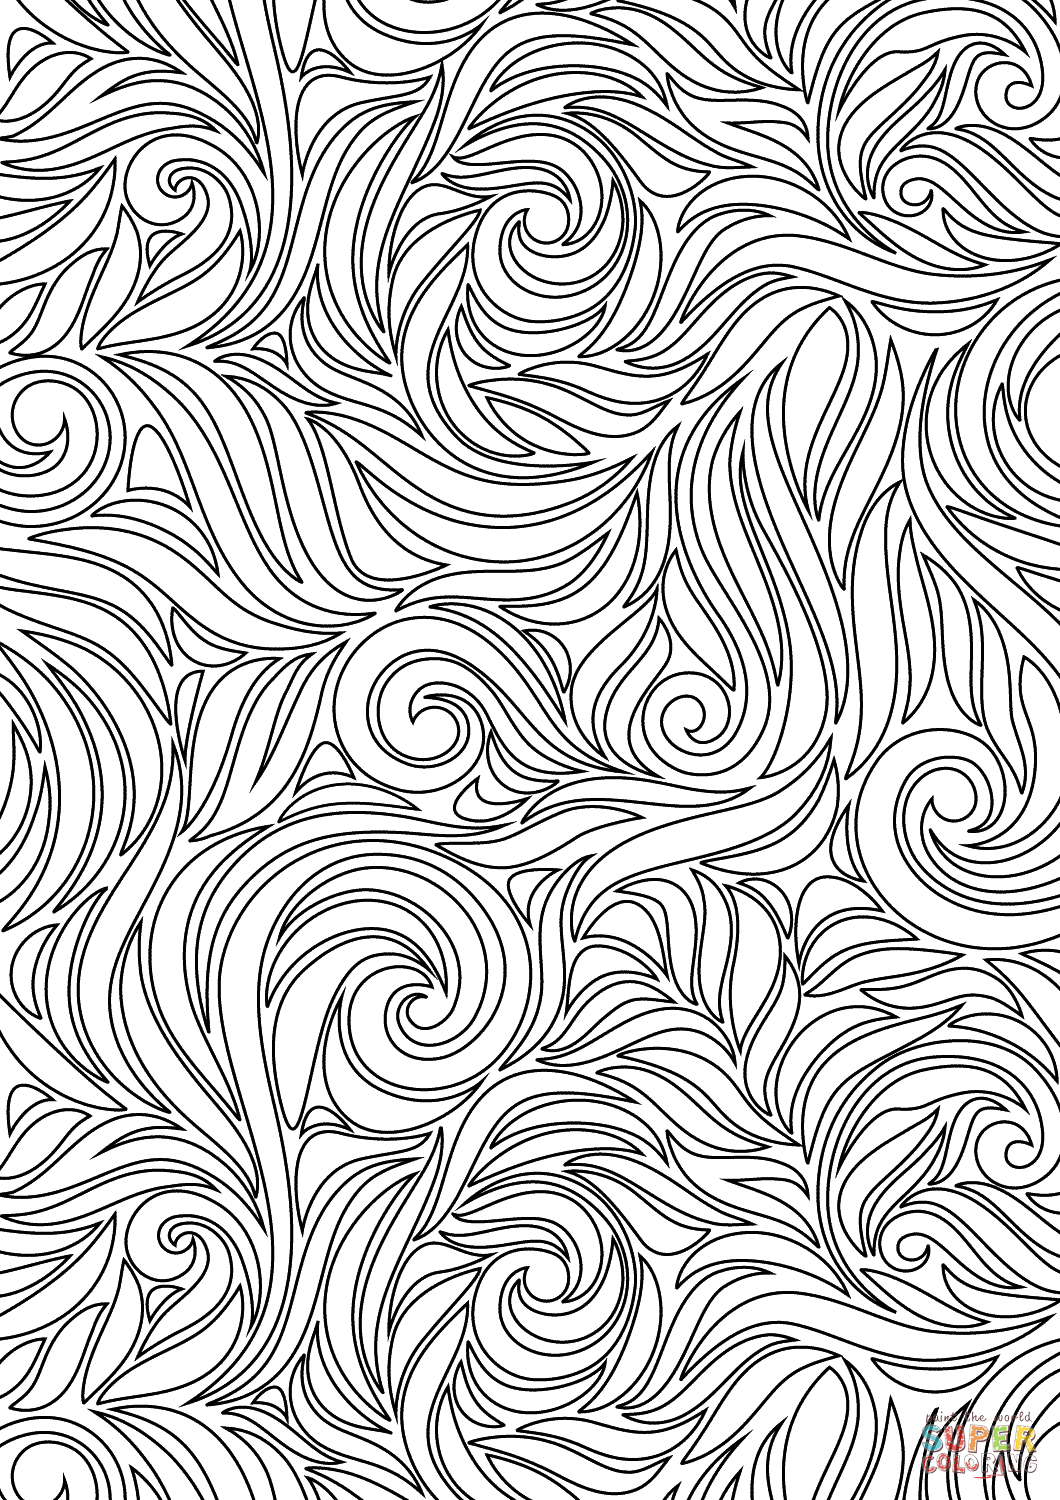 Attern coloring page